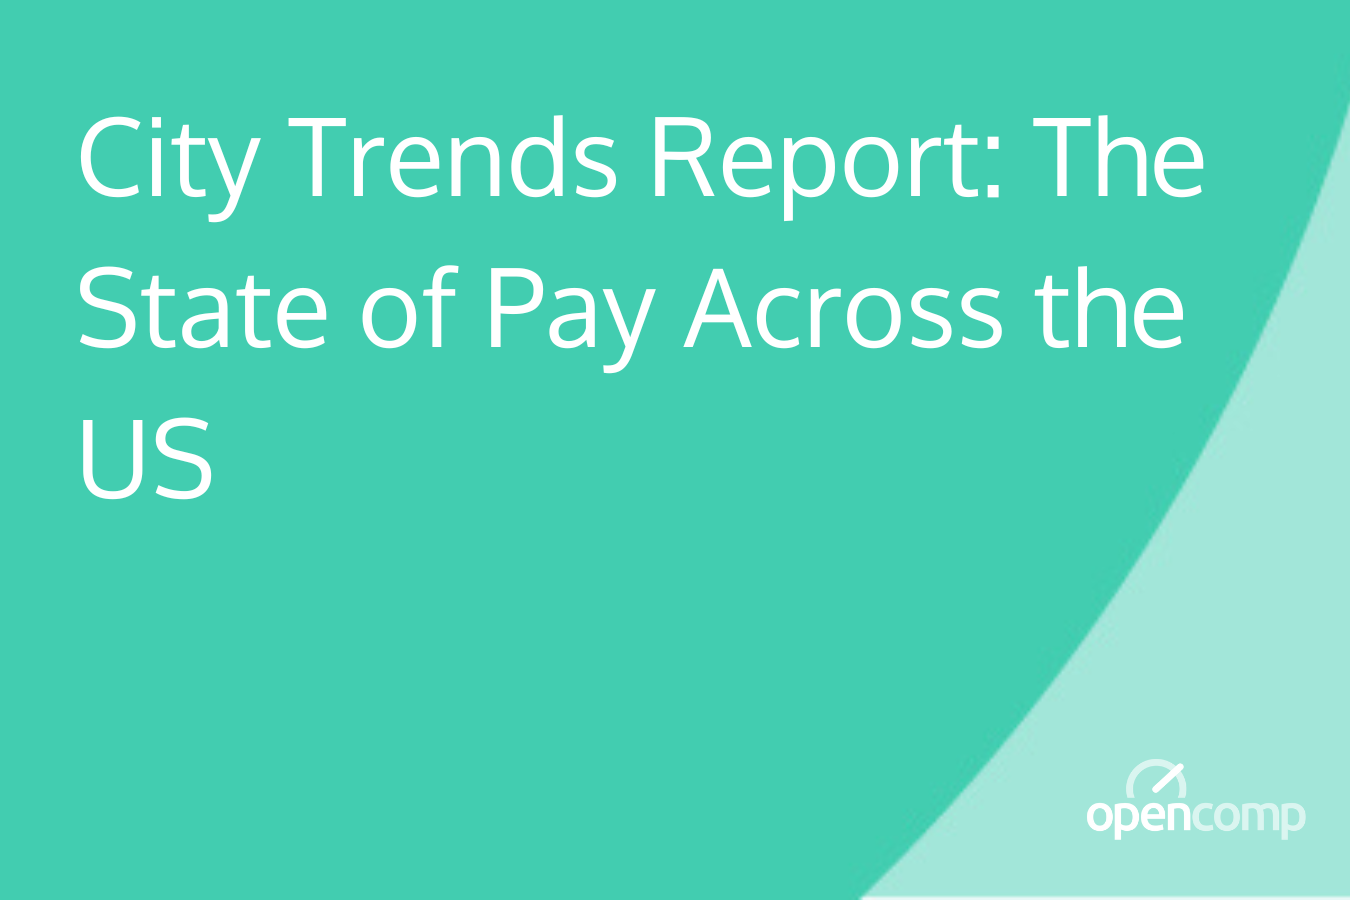 City Trends Report The State of Pay Across the US